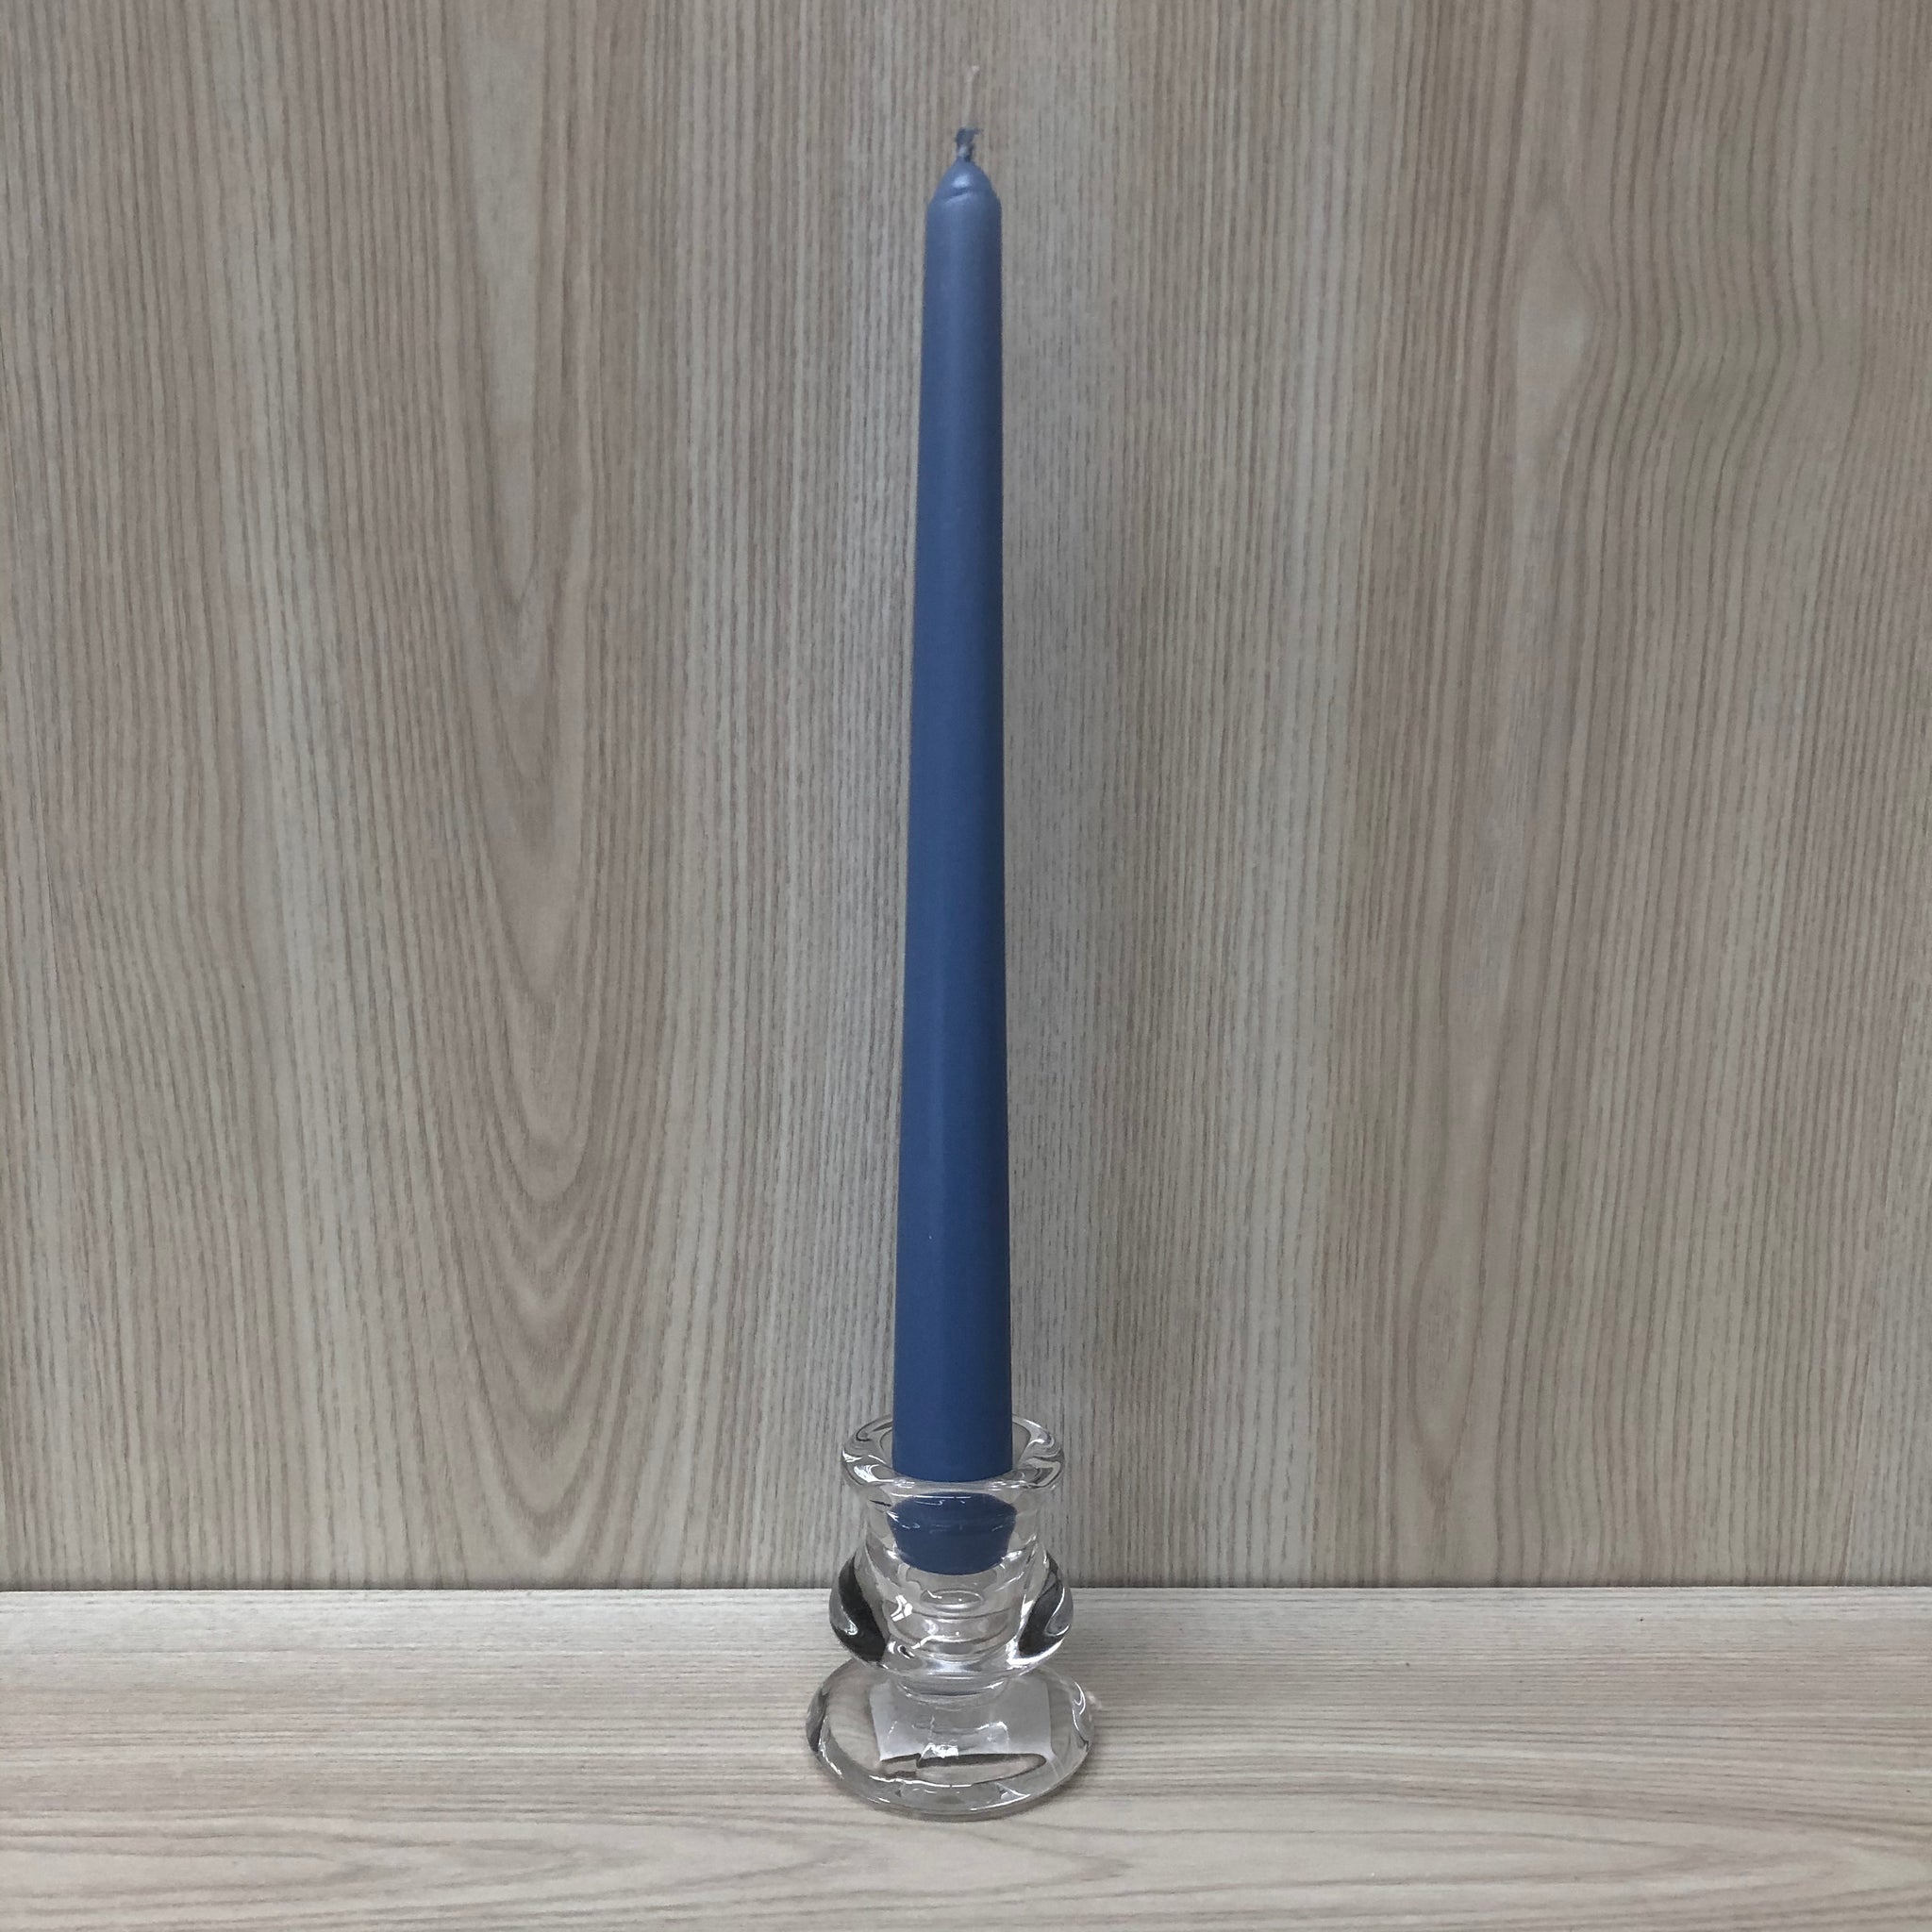 Taper Dinner Candle - Wedgewood Blue - The Pretty Prop Shop Parties, Auckland New Zealand